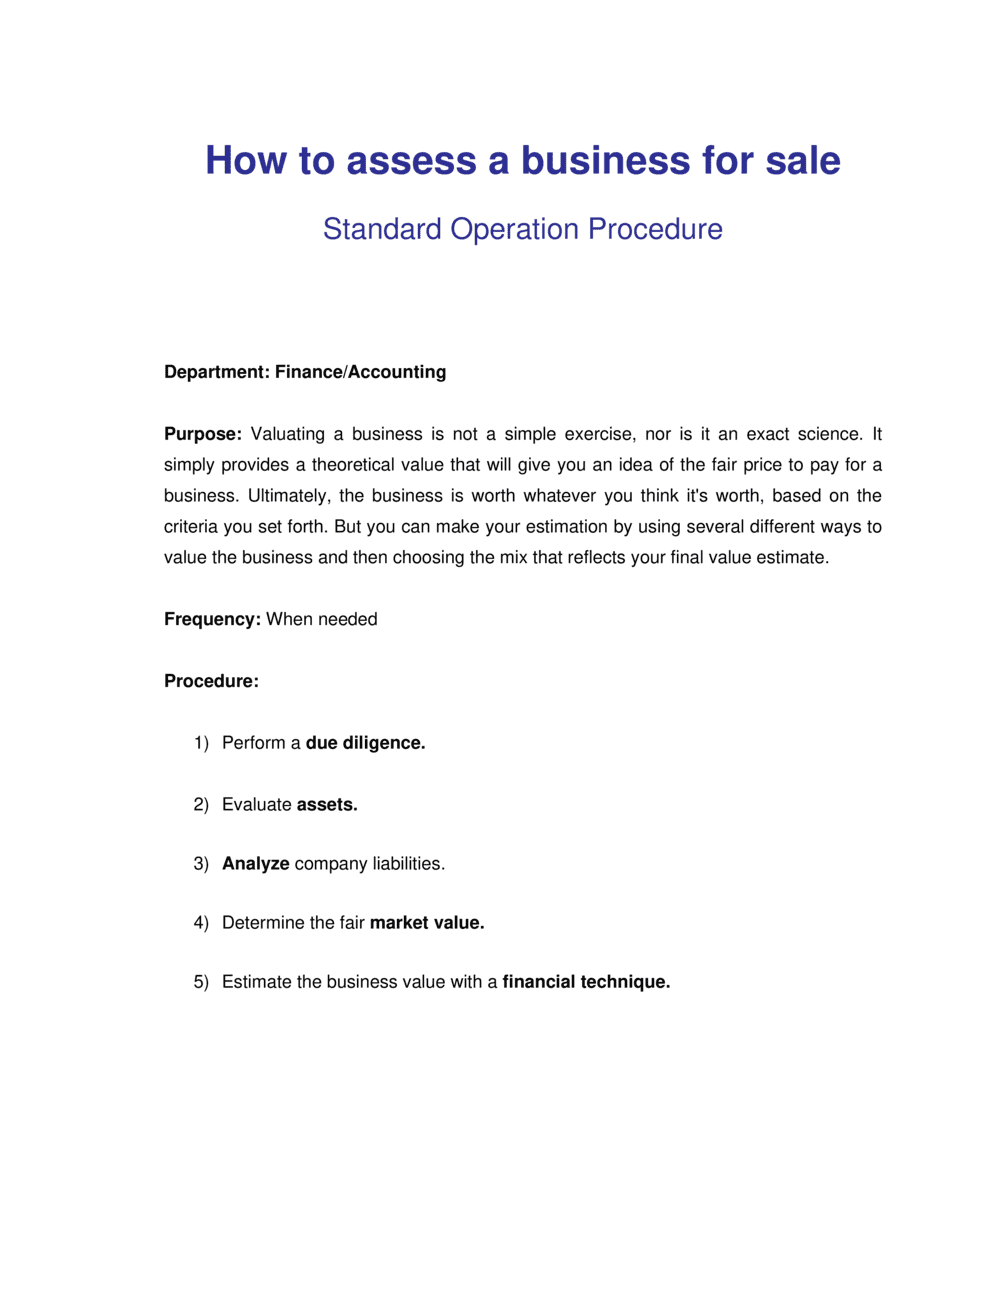 How to Make a Business Assessment  by Business-in-a-Box™